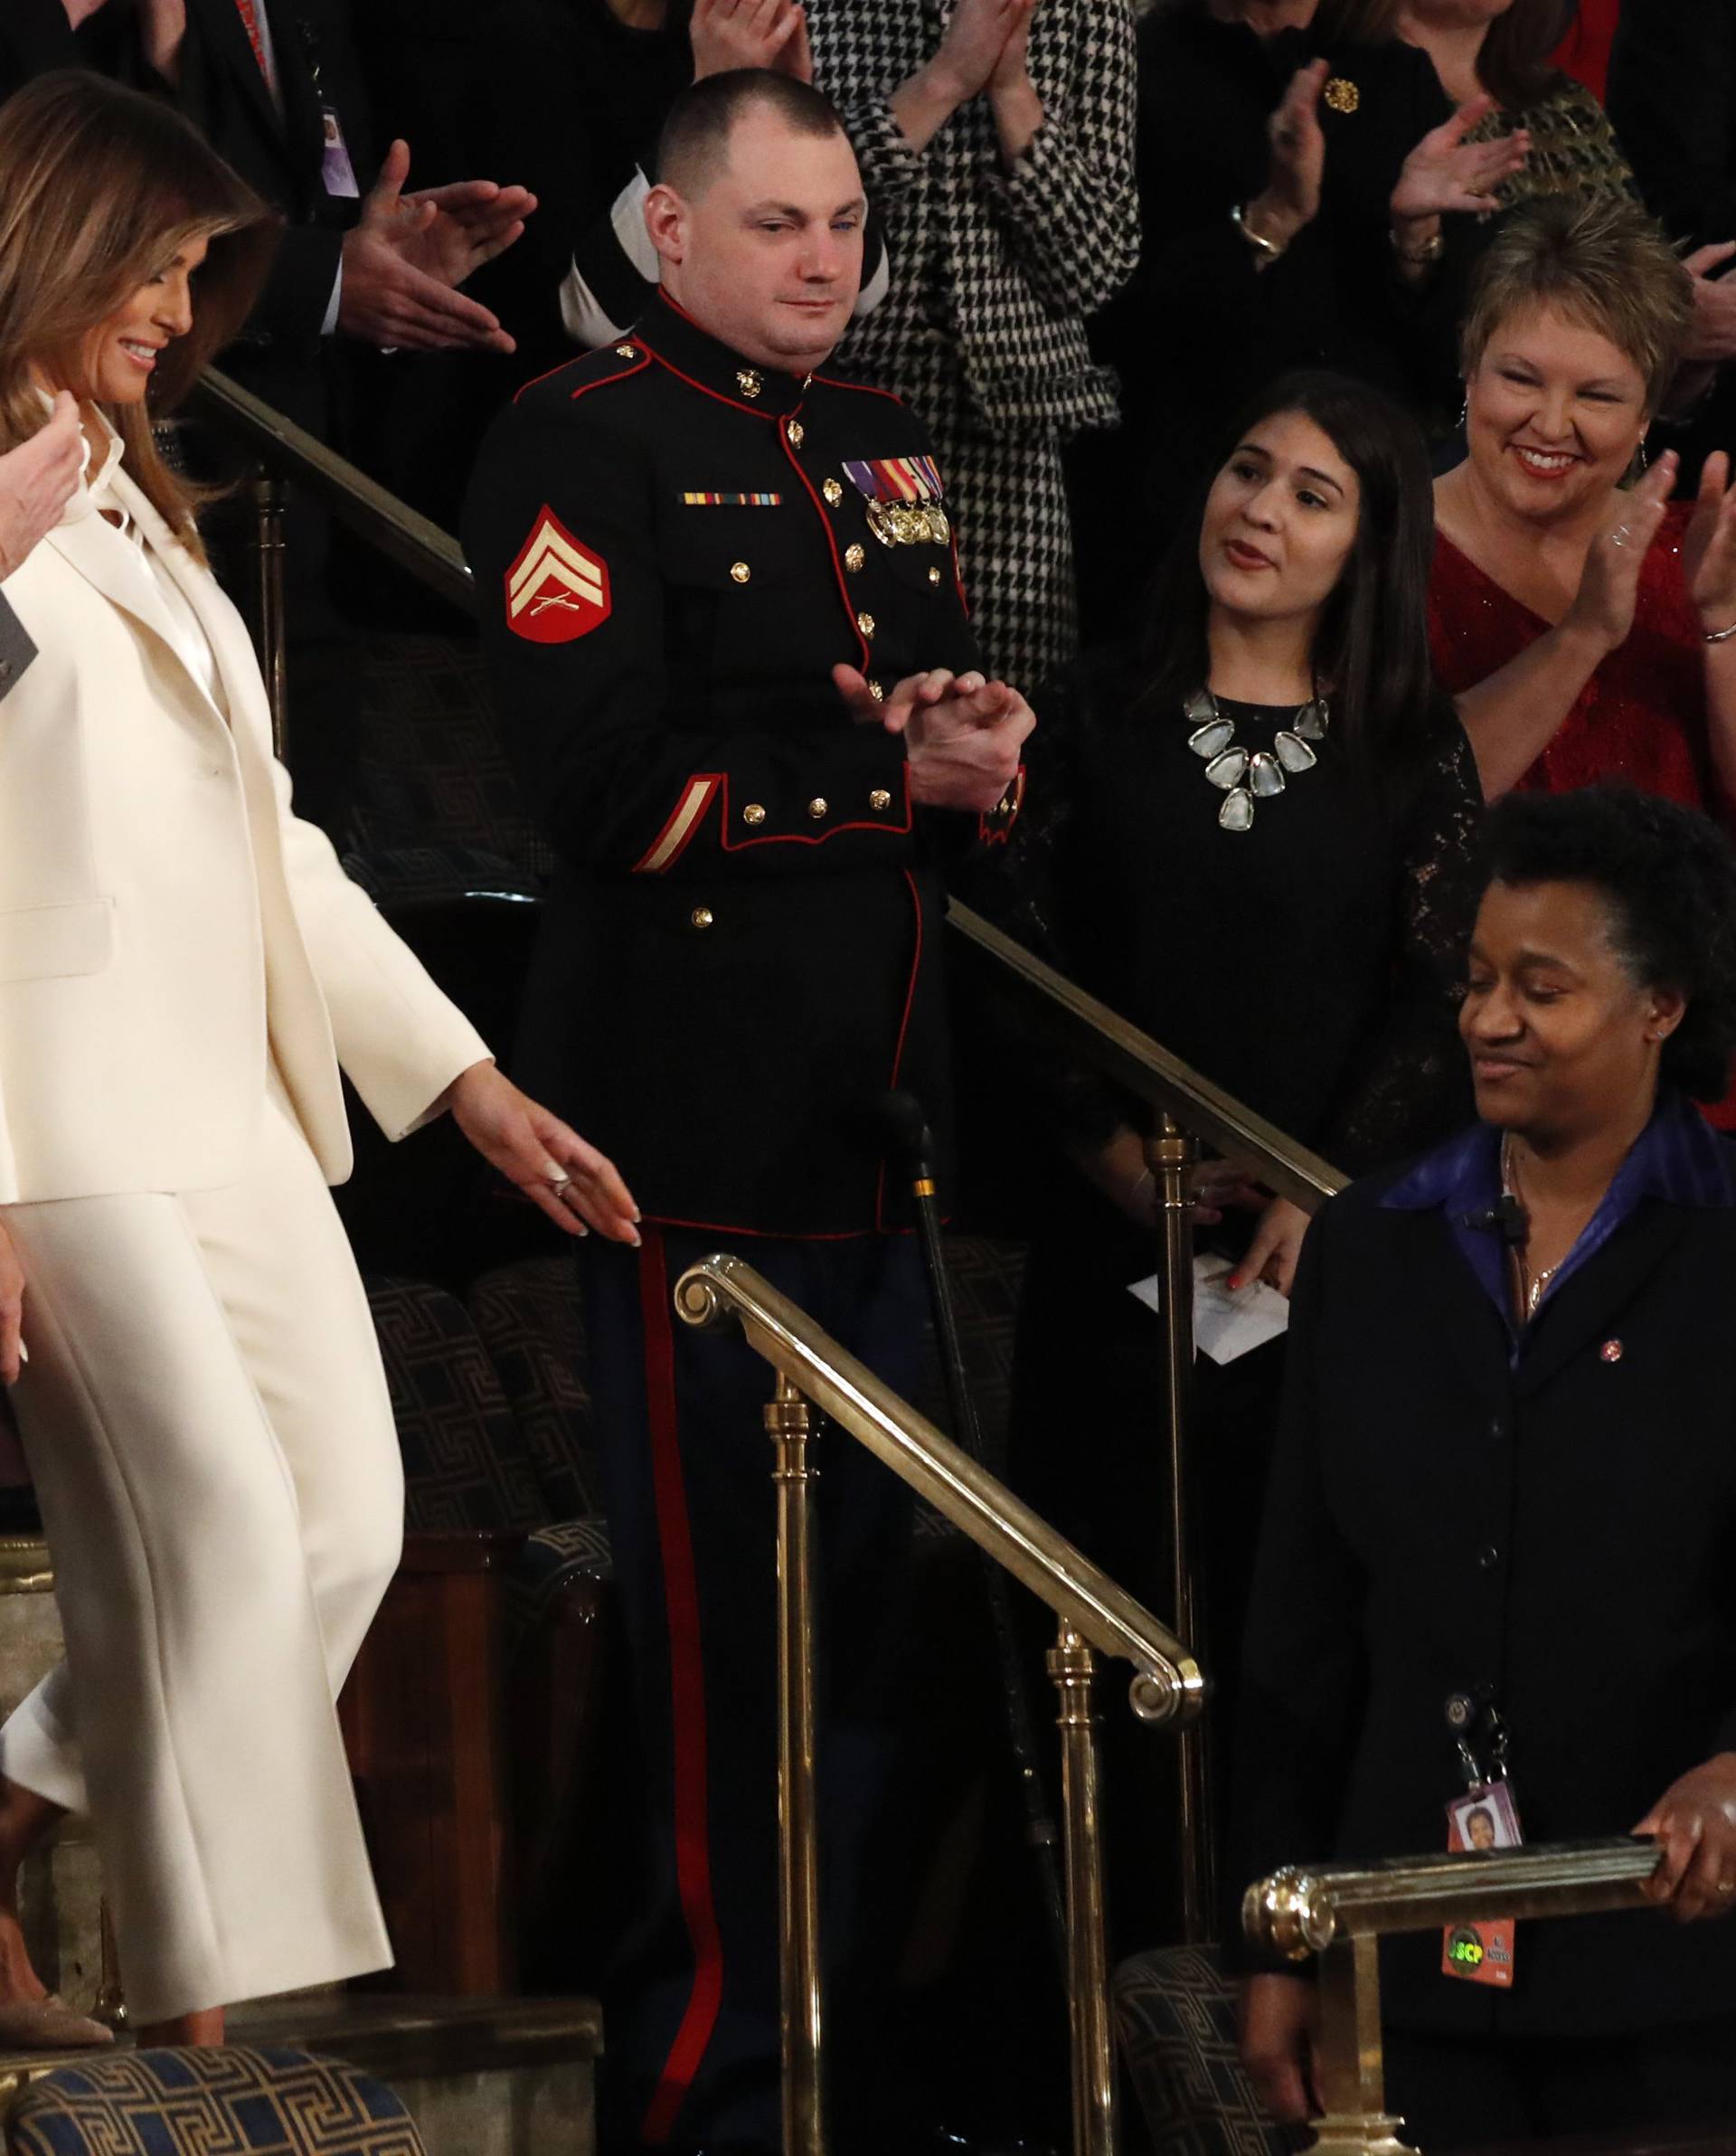 First lady Melania Trump is applauded during U.S. President Trump's State of the Union address in Washington